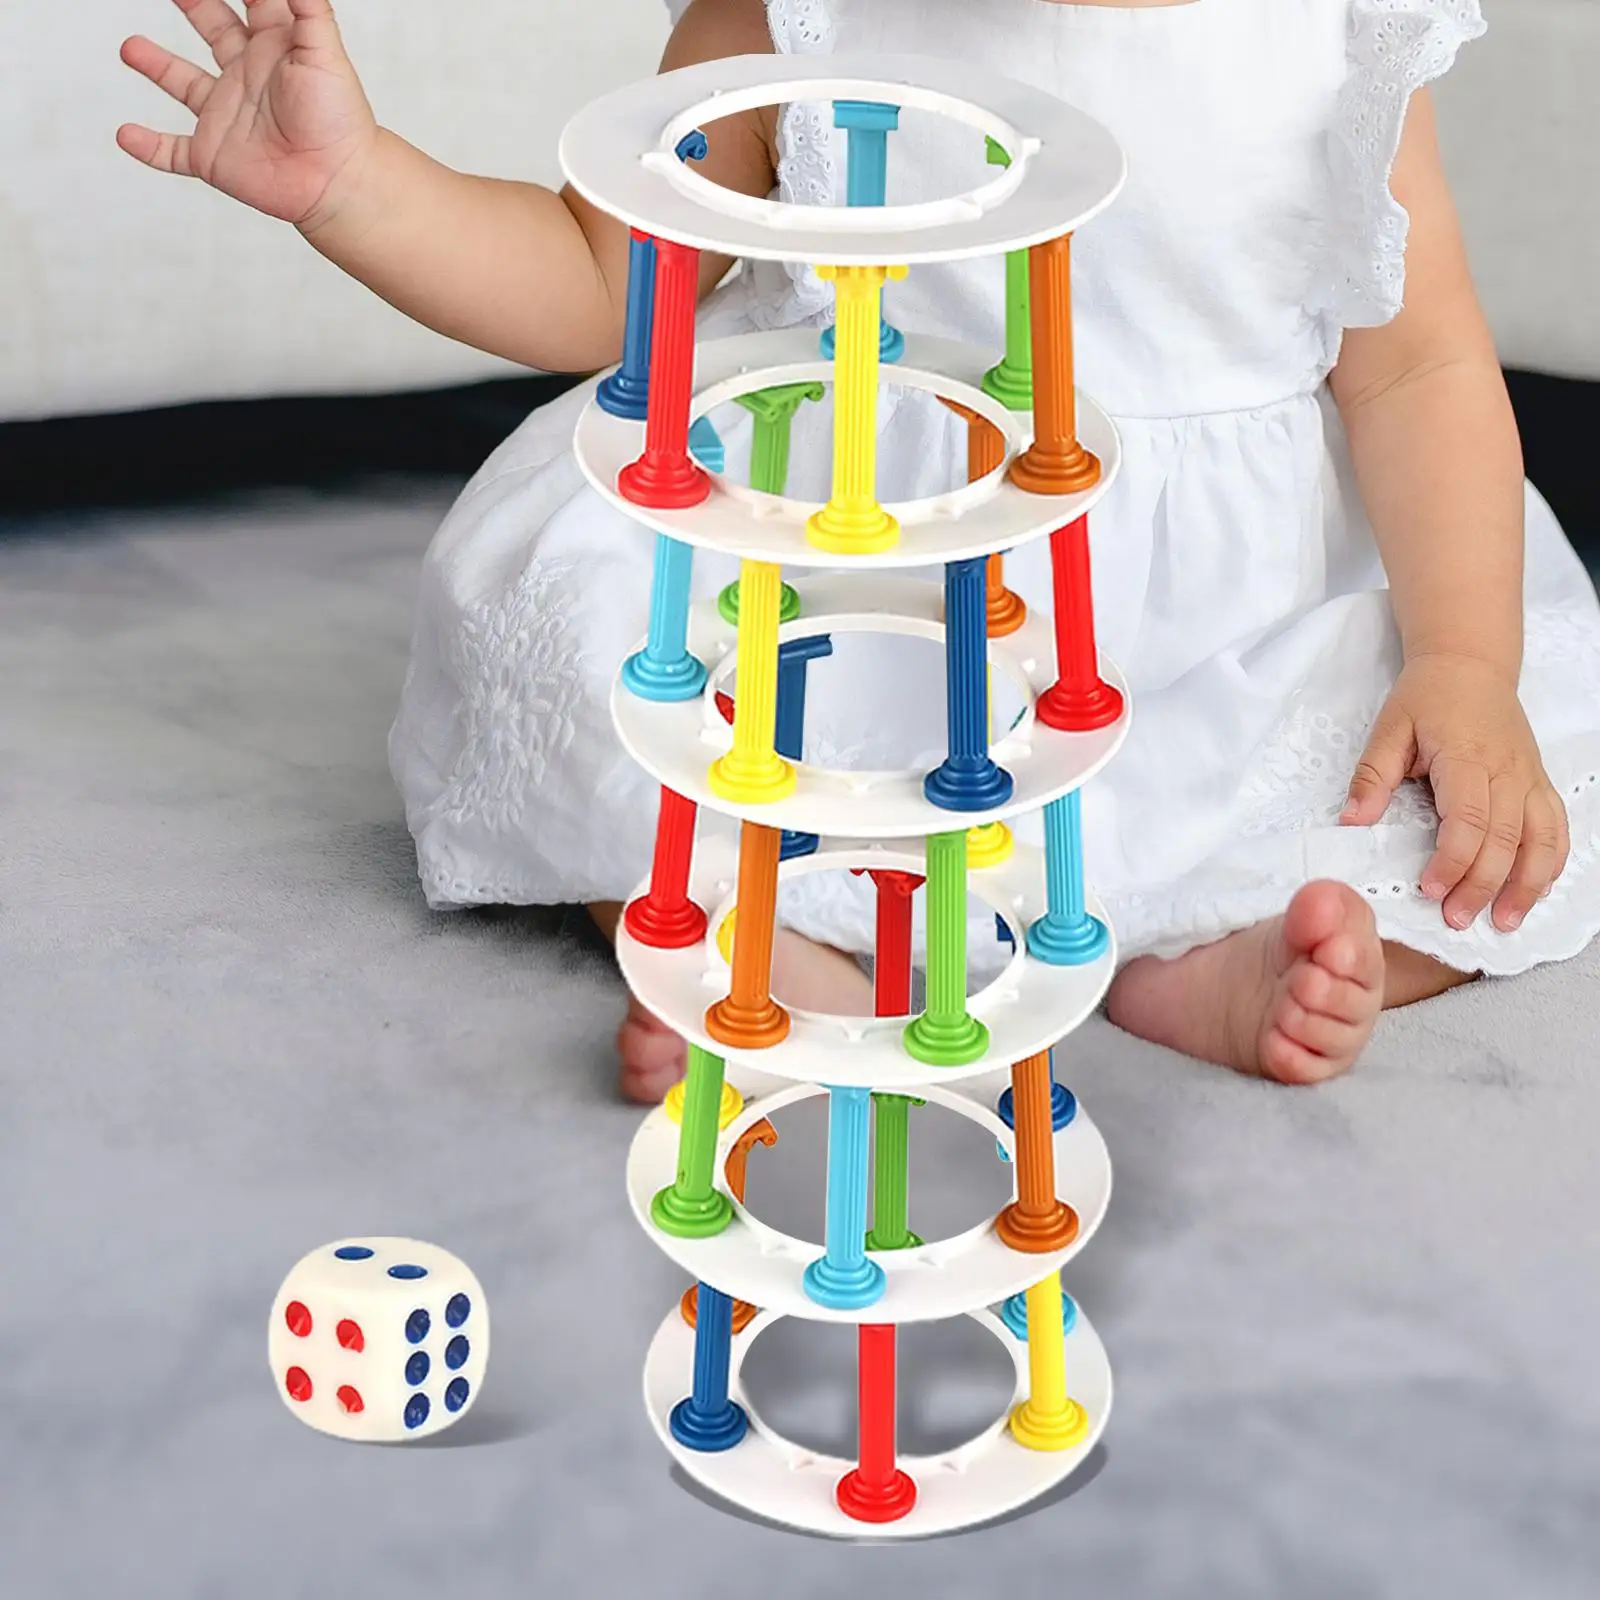 Tumble Tower Game Classic Games with Dice Fine Motor Skill Game Stacking Tumble Tower for Travel Indoor Boys Girls